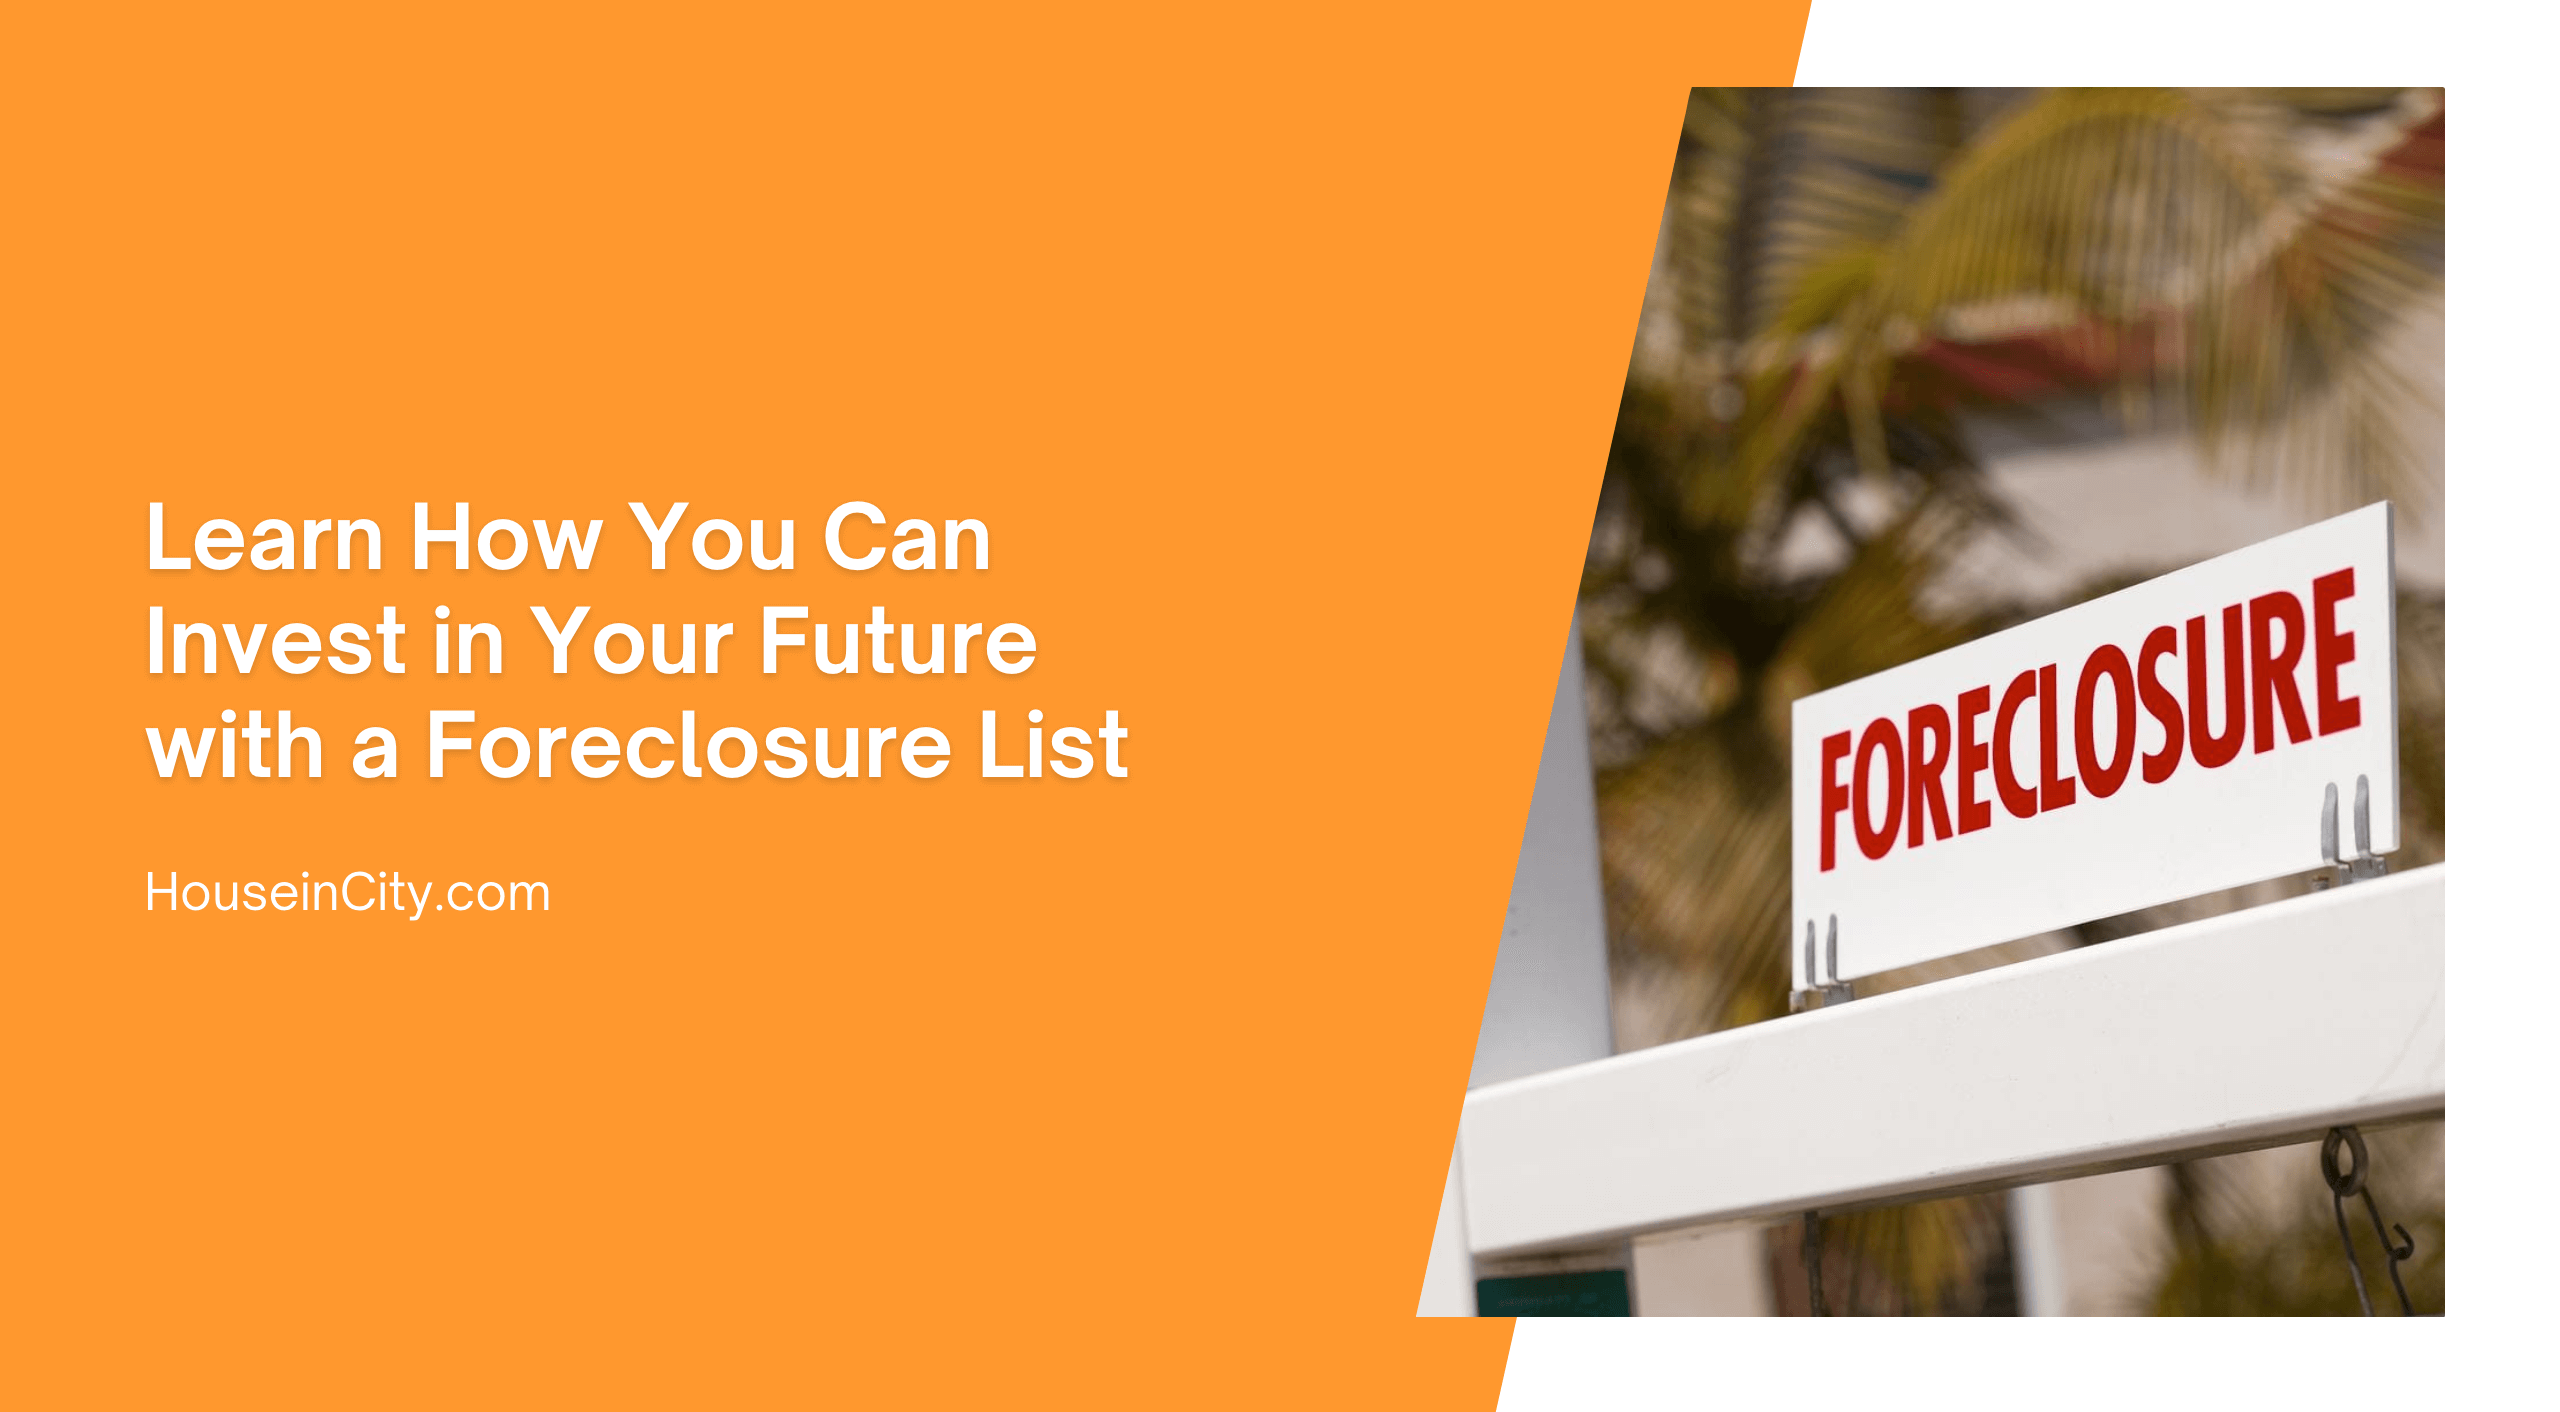 Learn How You Can Invest in Your Future with a Foreclosure List